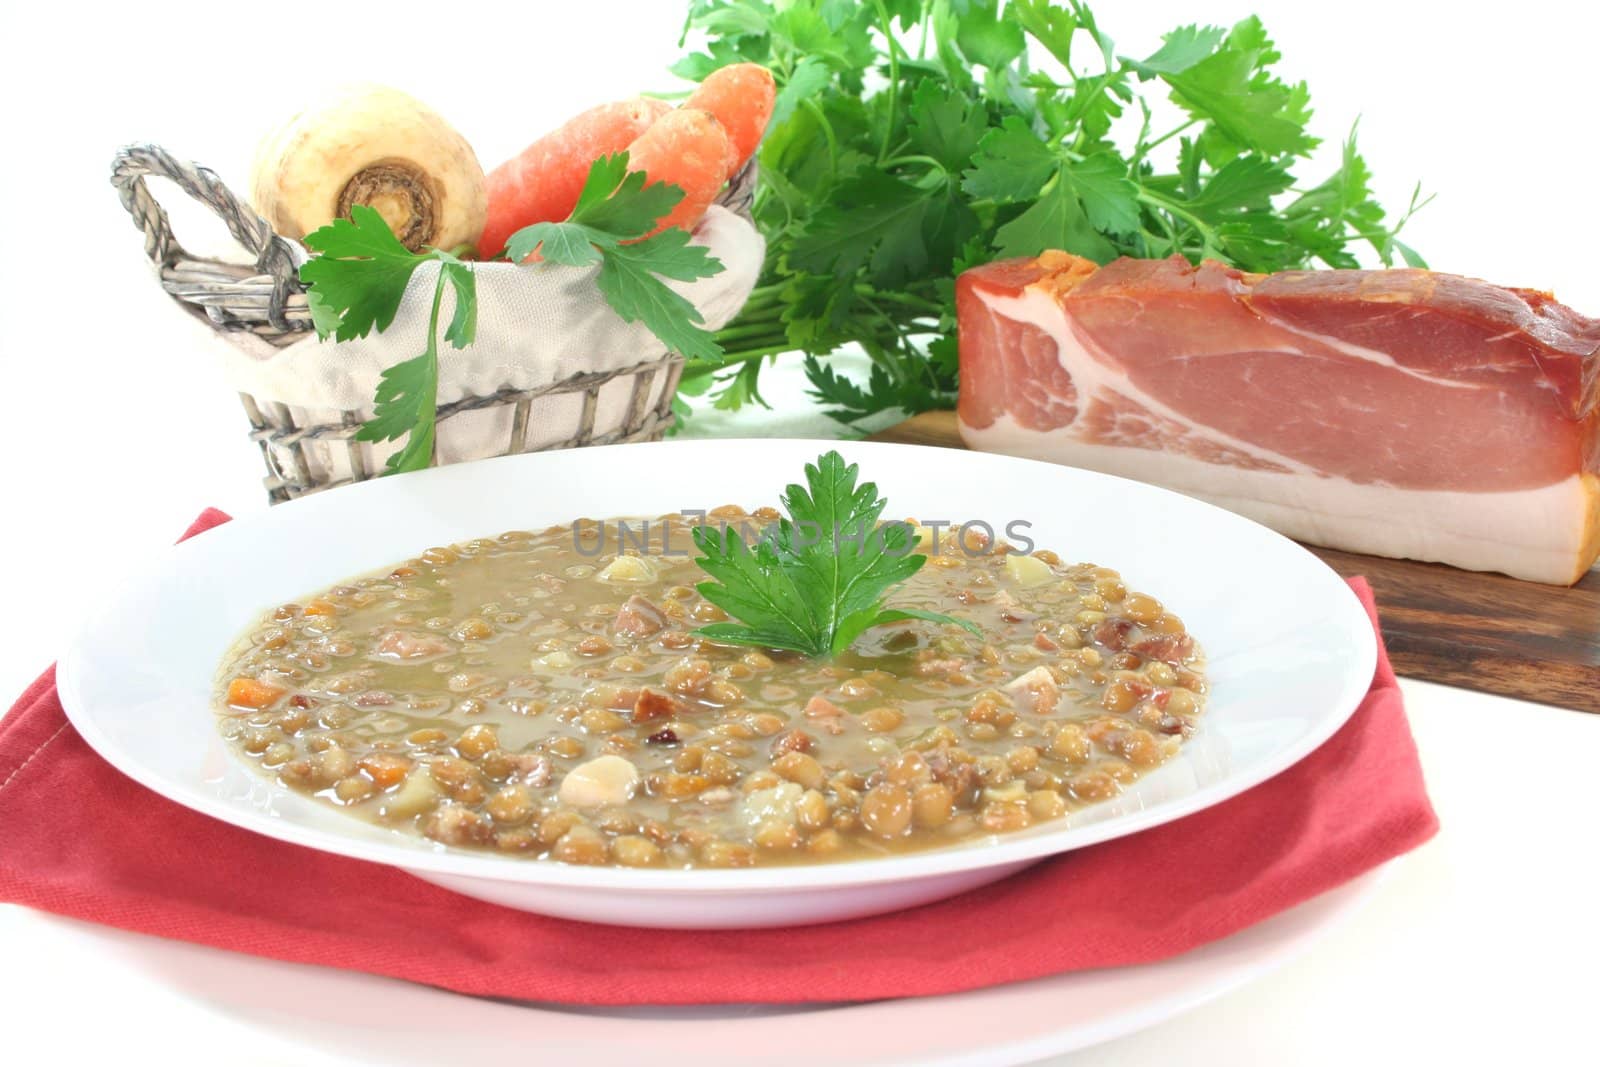 Lentil stew by discovery